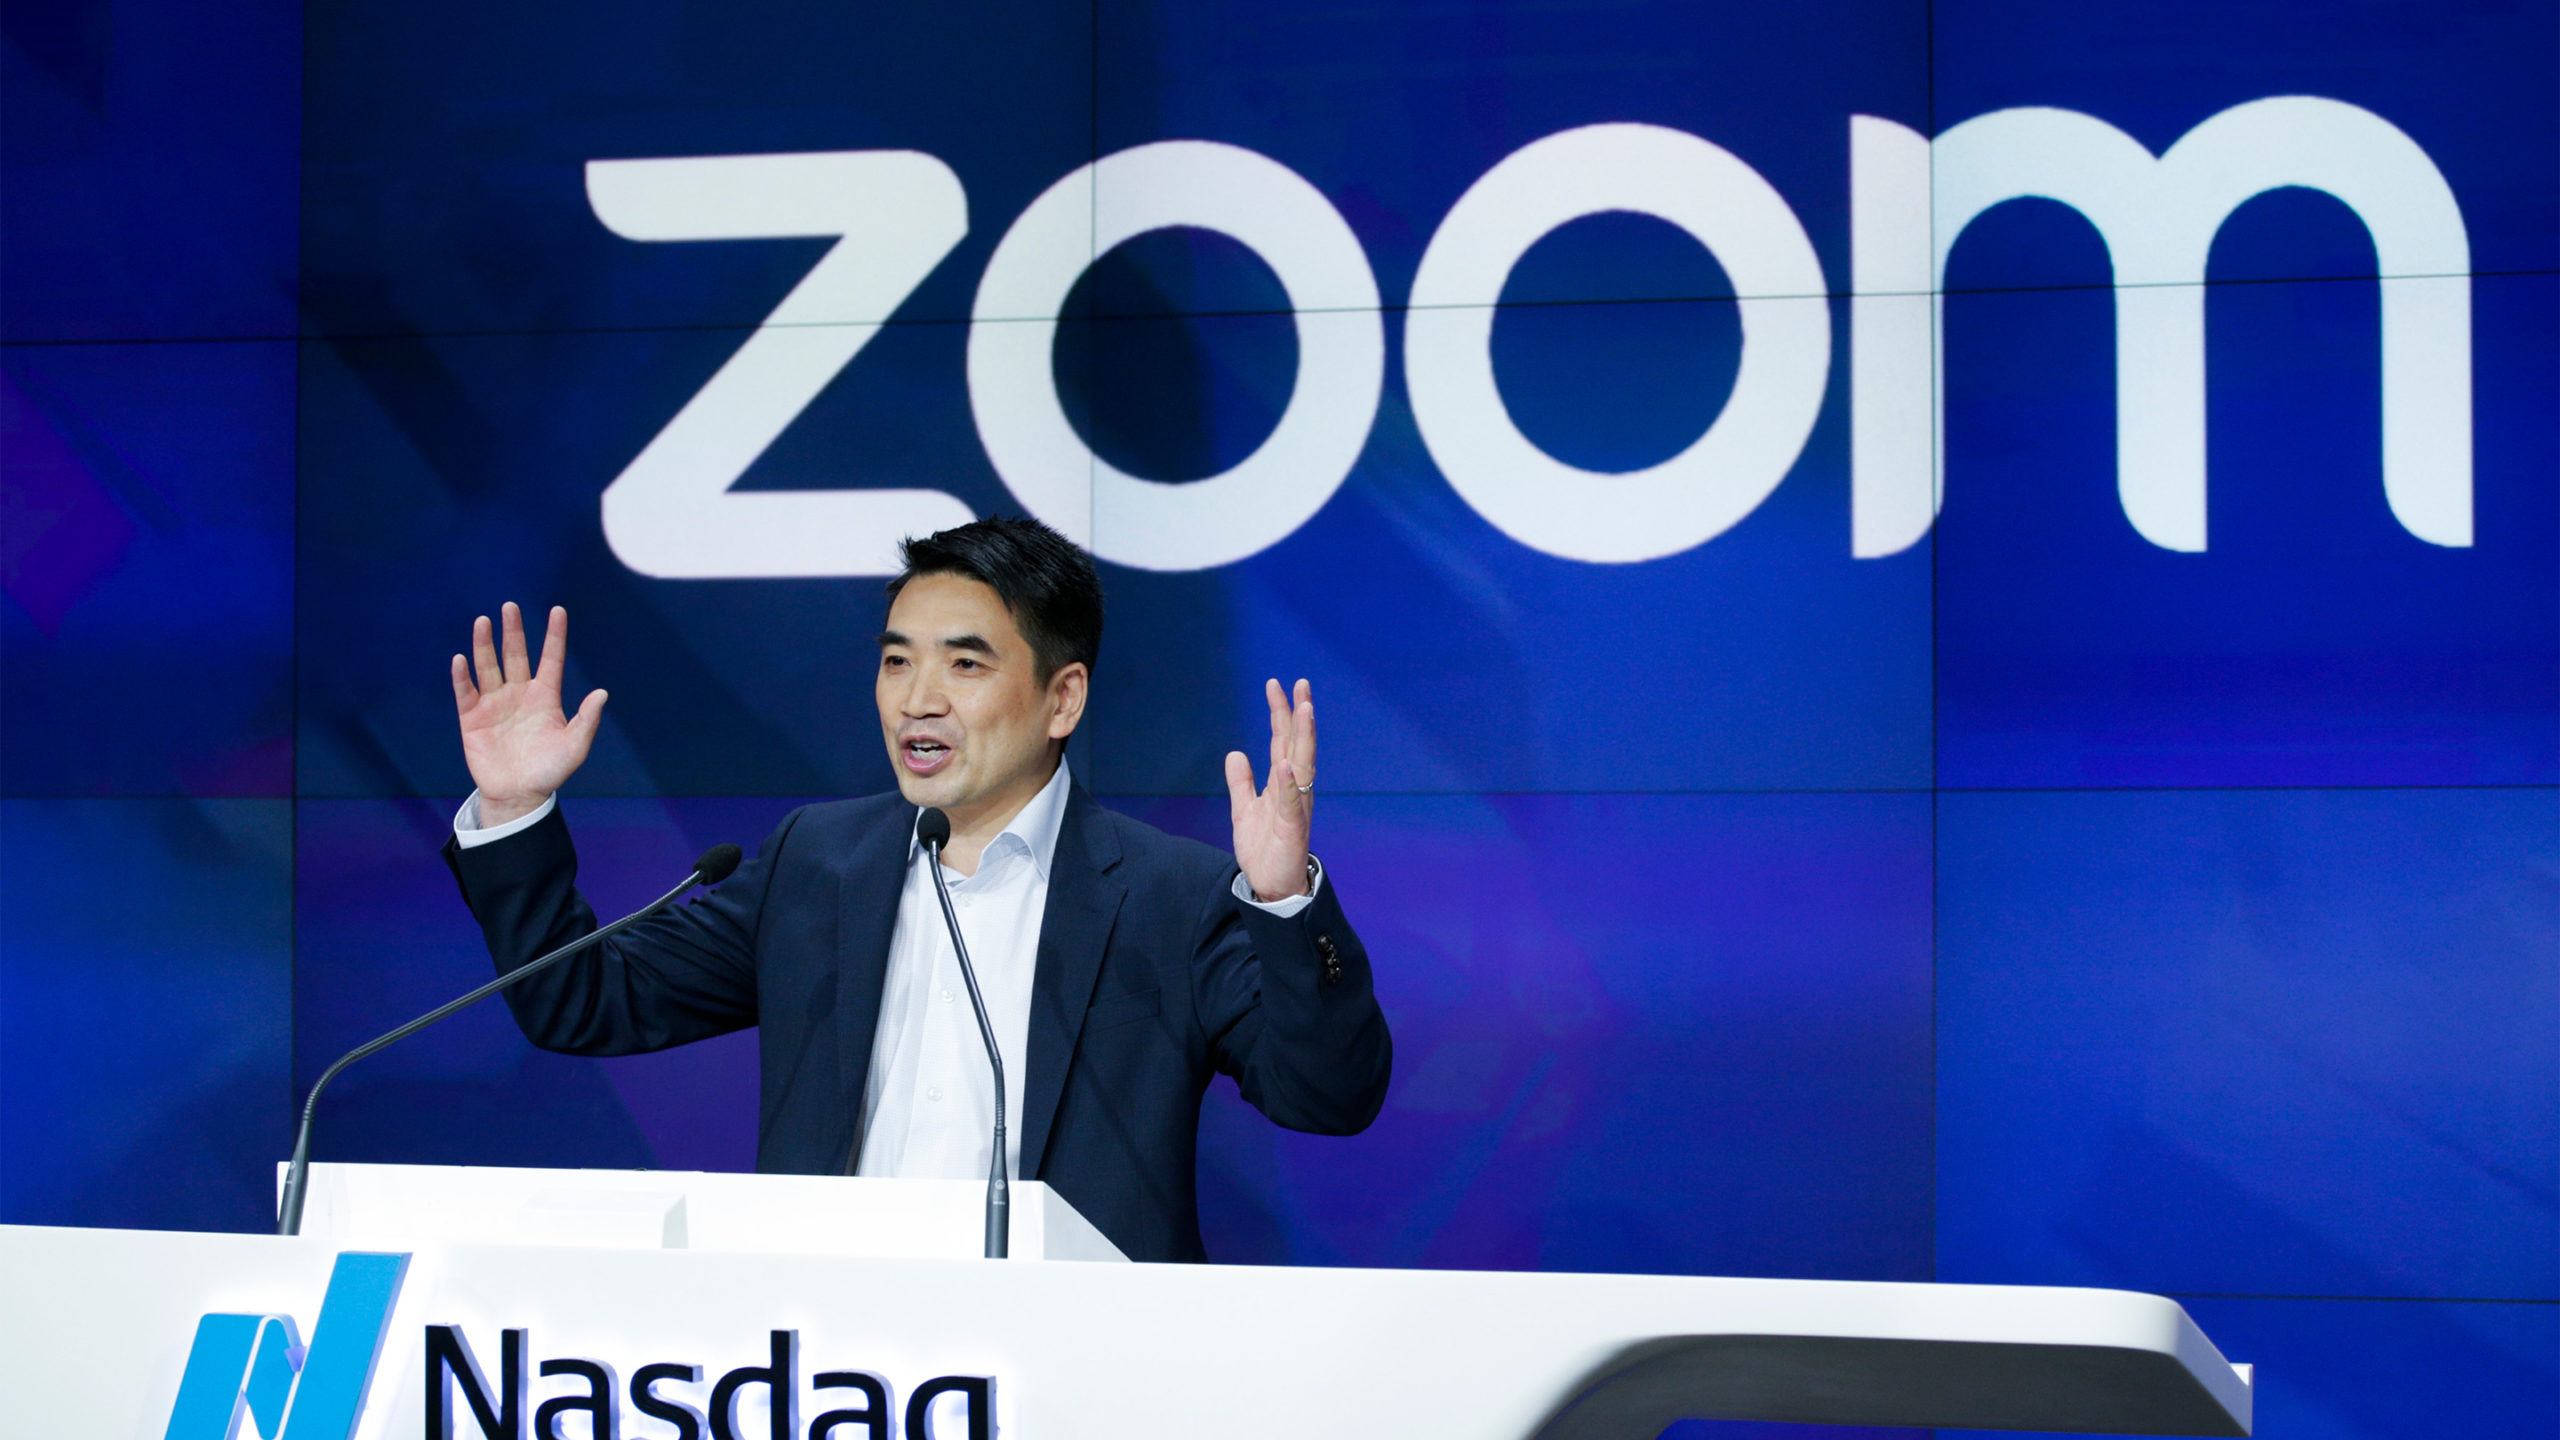 Zoom admits bowing to China censorship in cutting off activists’ accounts